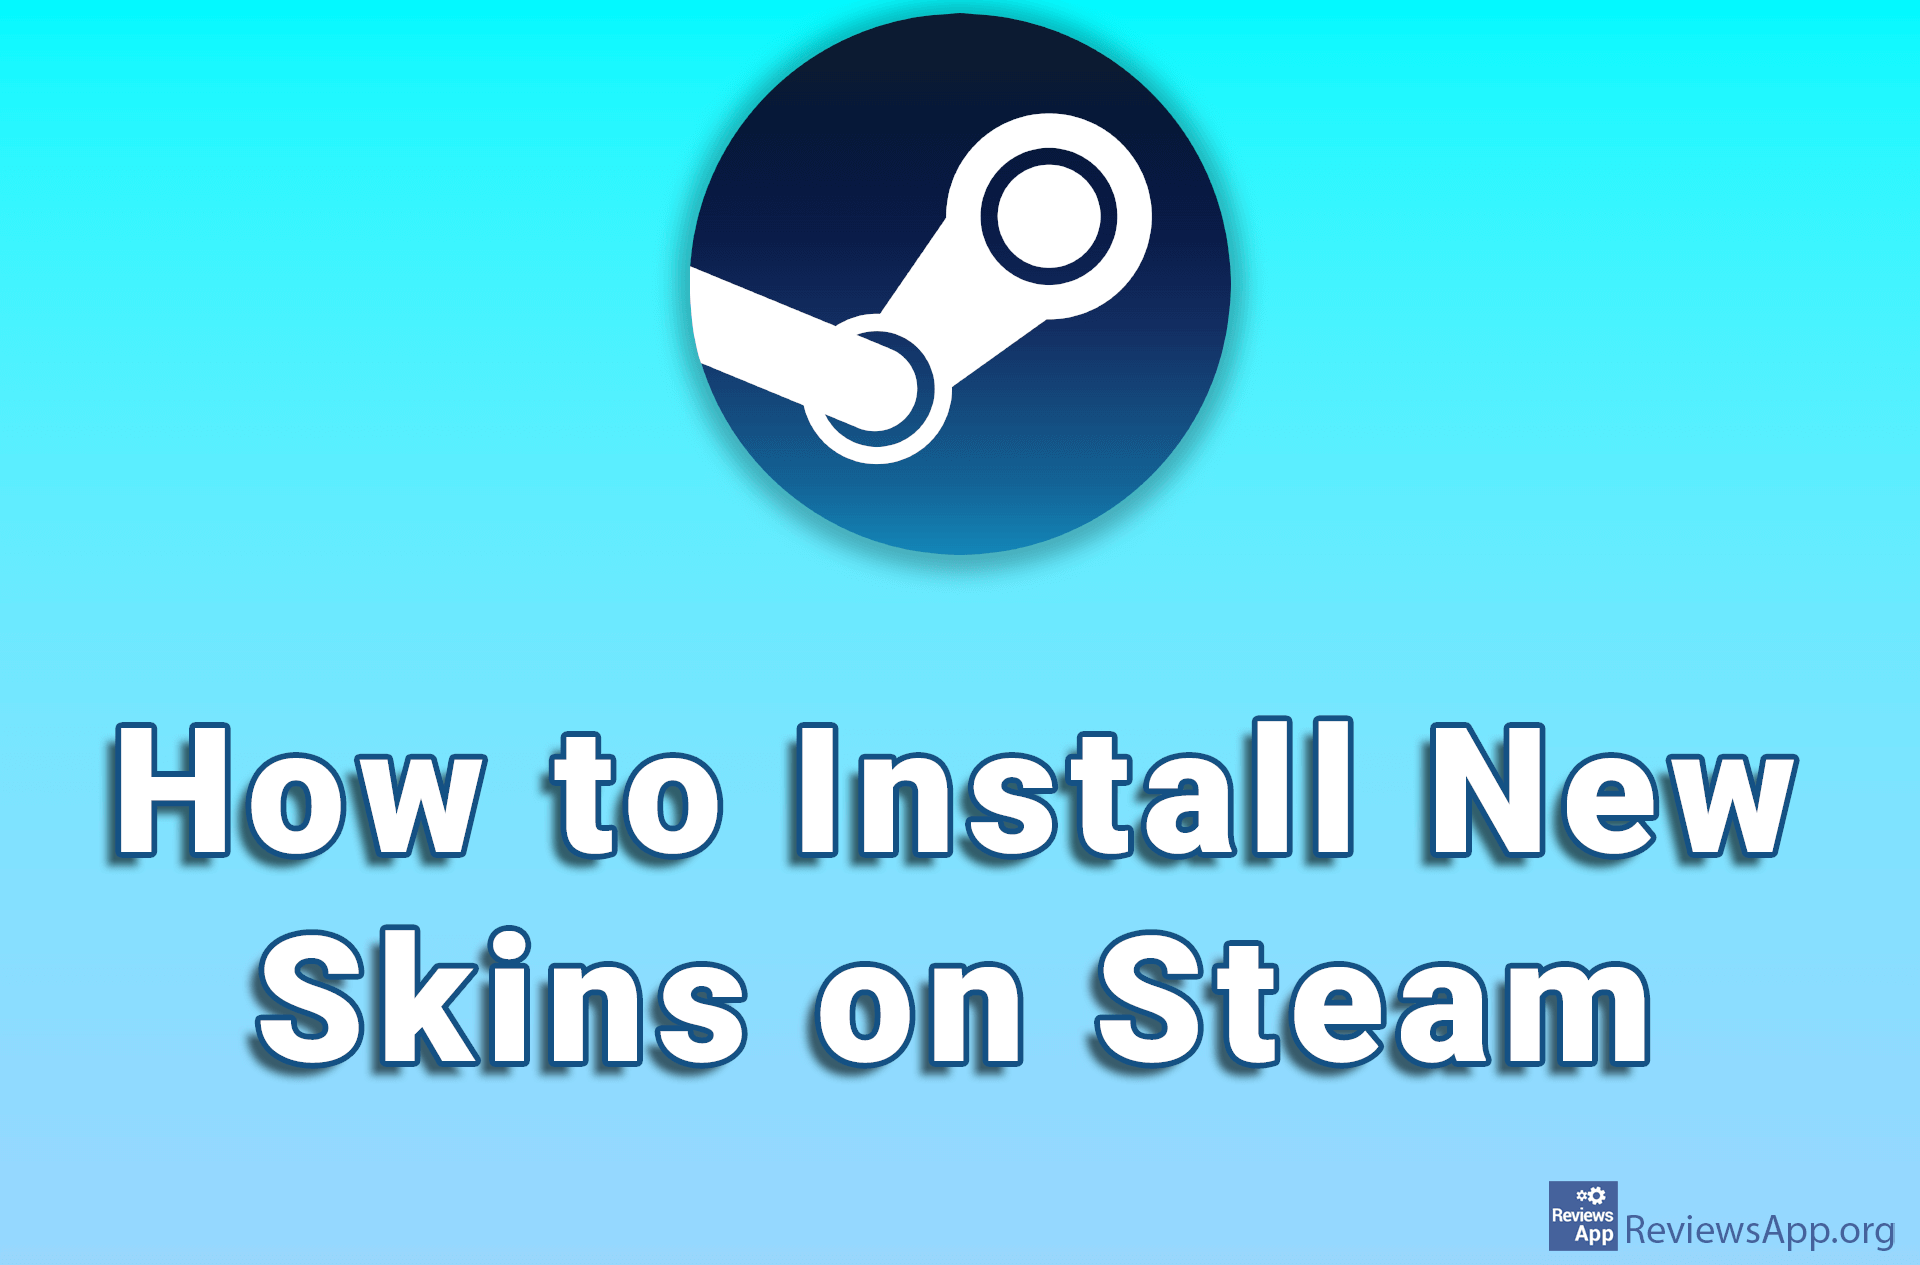 How to Install New Skins on Steam